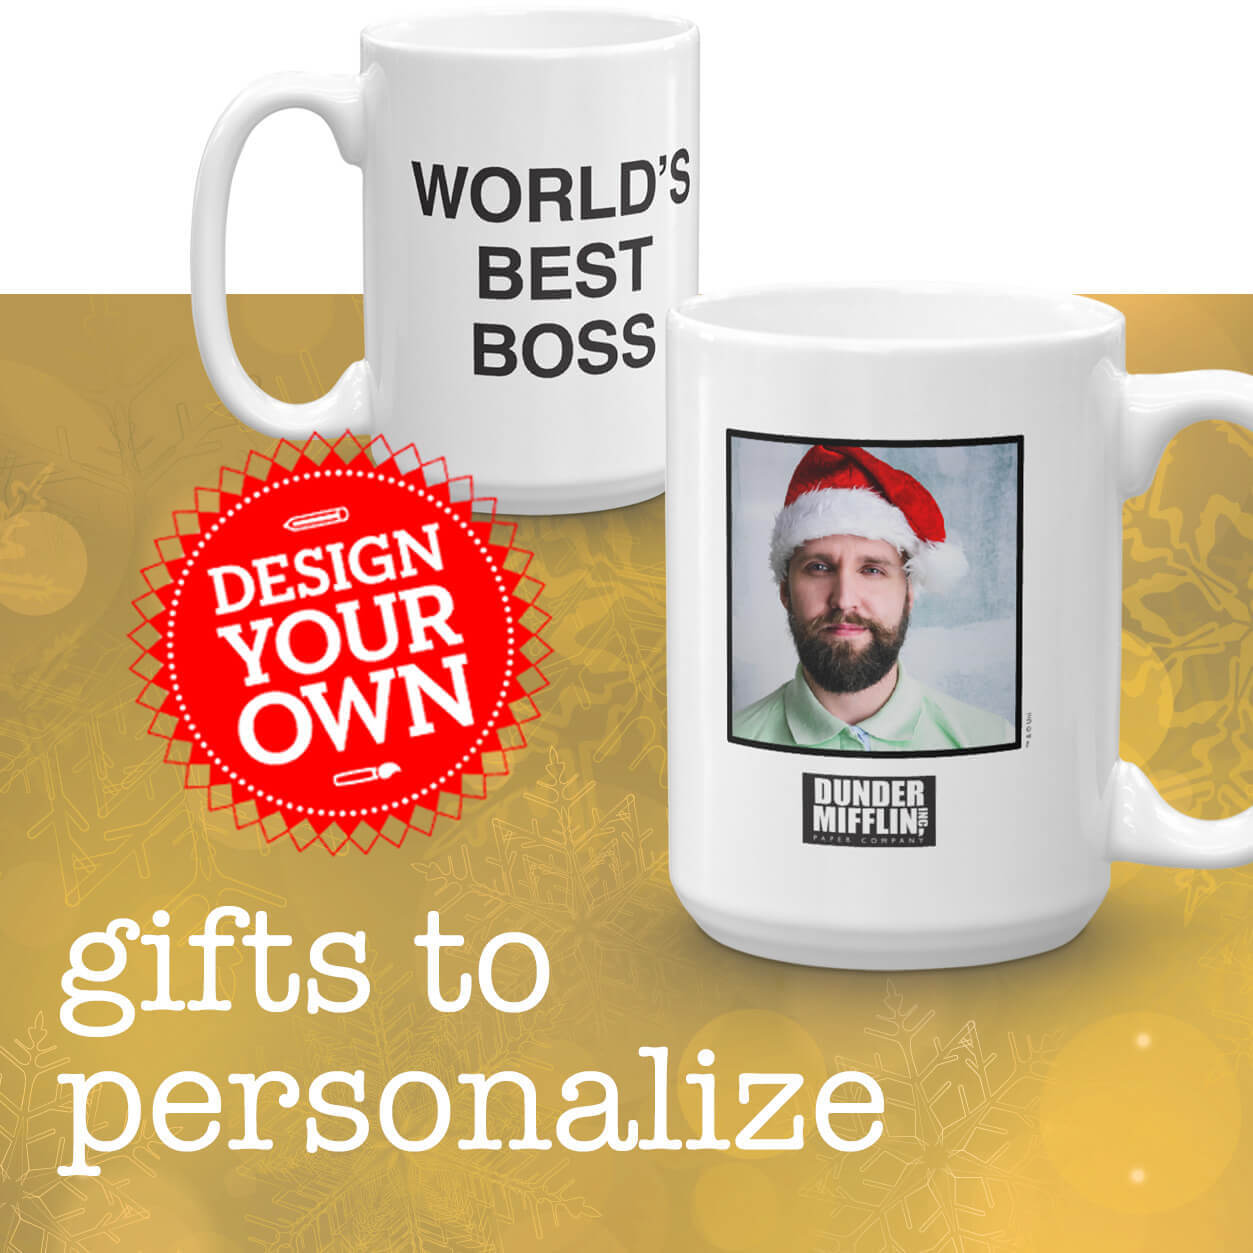 The Office Holiday Gift Guide Gifts For Her – NBC Store